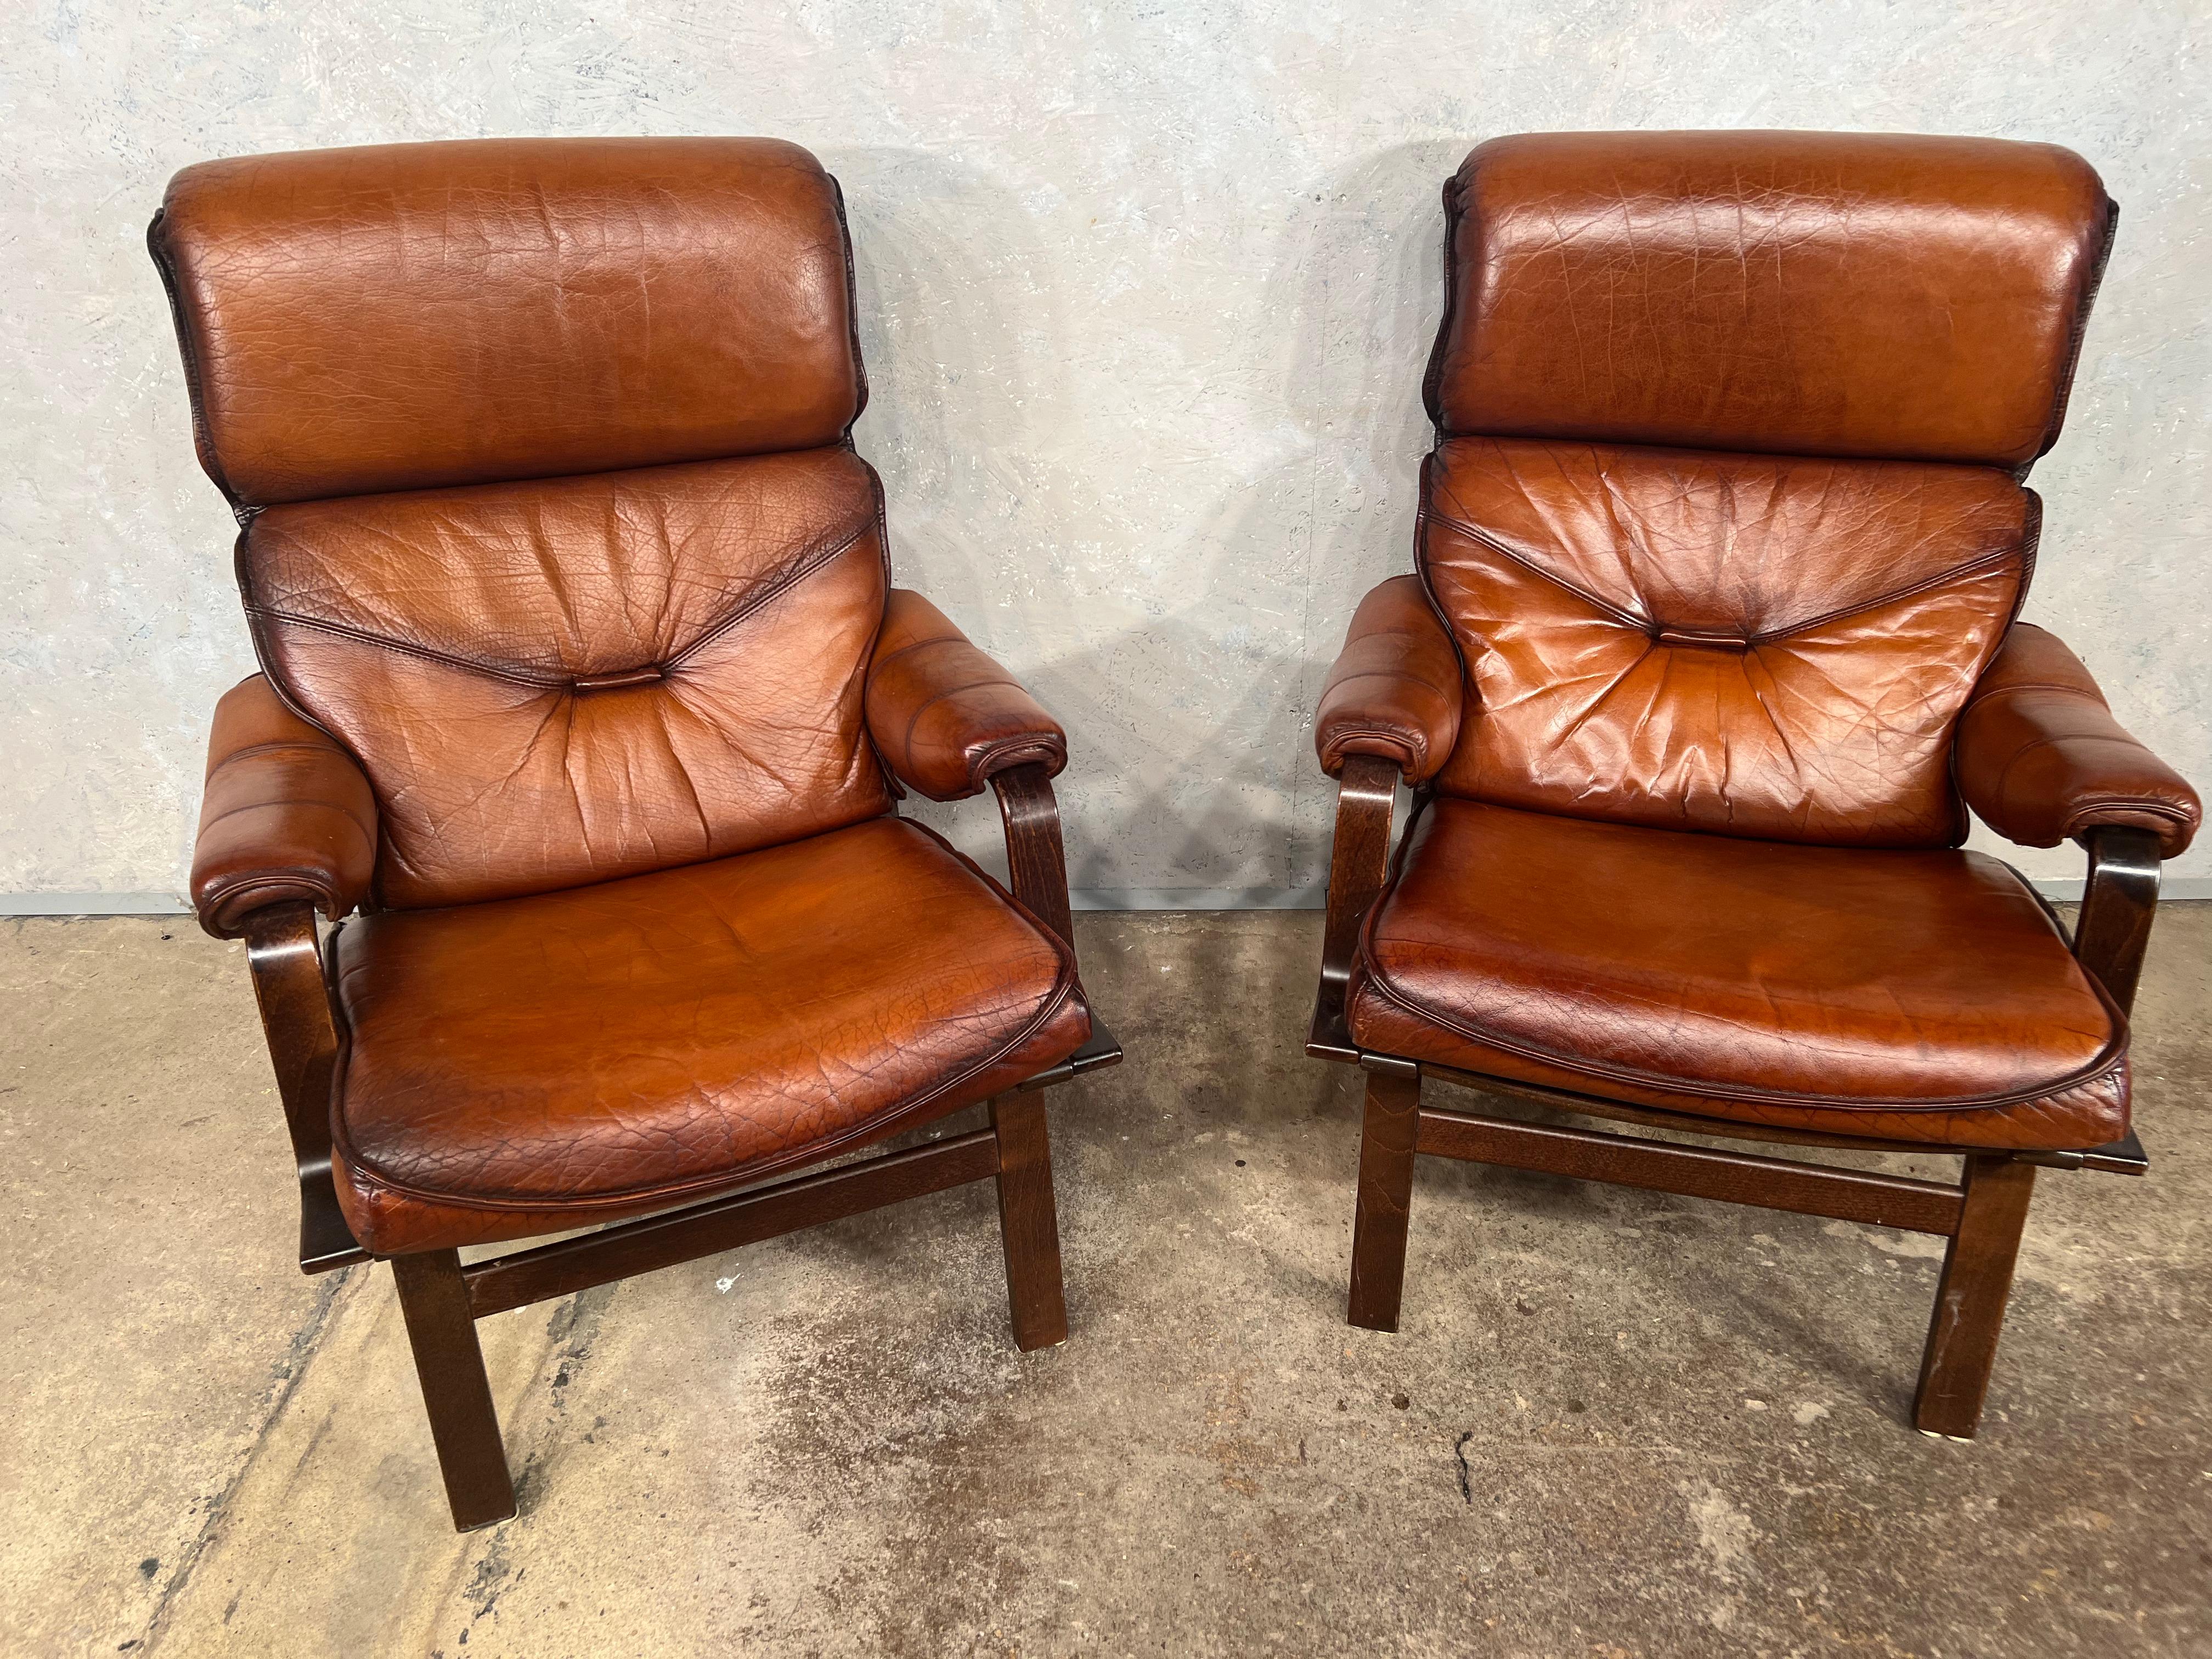 A stunning pair of Danish Vintage Bentwood Chairs, late 70s, hand dyed leather a most beautiful cognac colour with a great finish.

In great condition.

Viewings welcome at our showroom in Lewes, East Sussex.